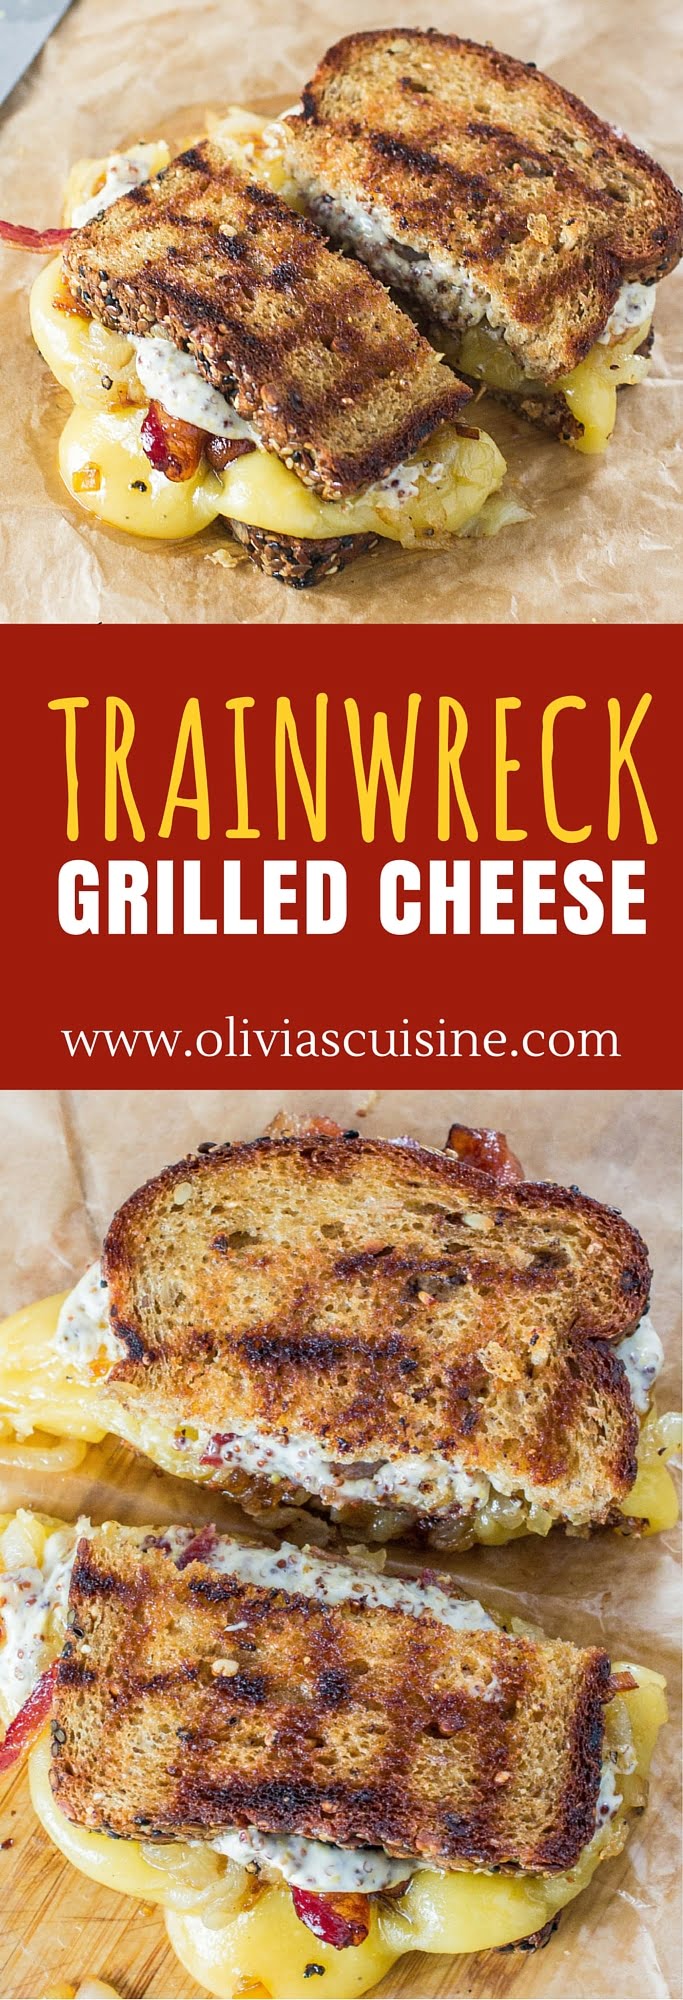 Trainwreck Grilled Cheese | www.oliviascuisine.com | Gouda cheese, caramelized onions and Maple Whiskey bacon join forces to create the most amazing grilled cheese ever! (Sponsored by Arla Dofino)